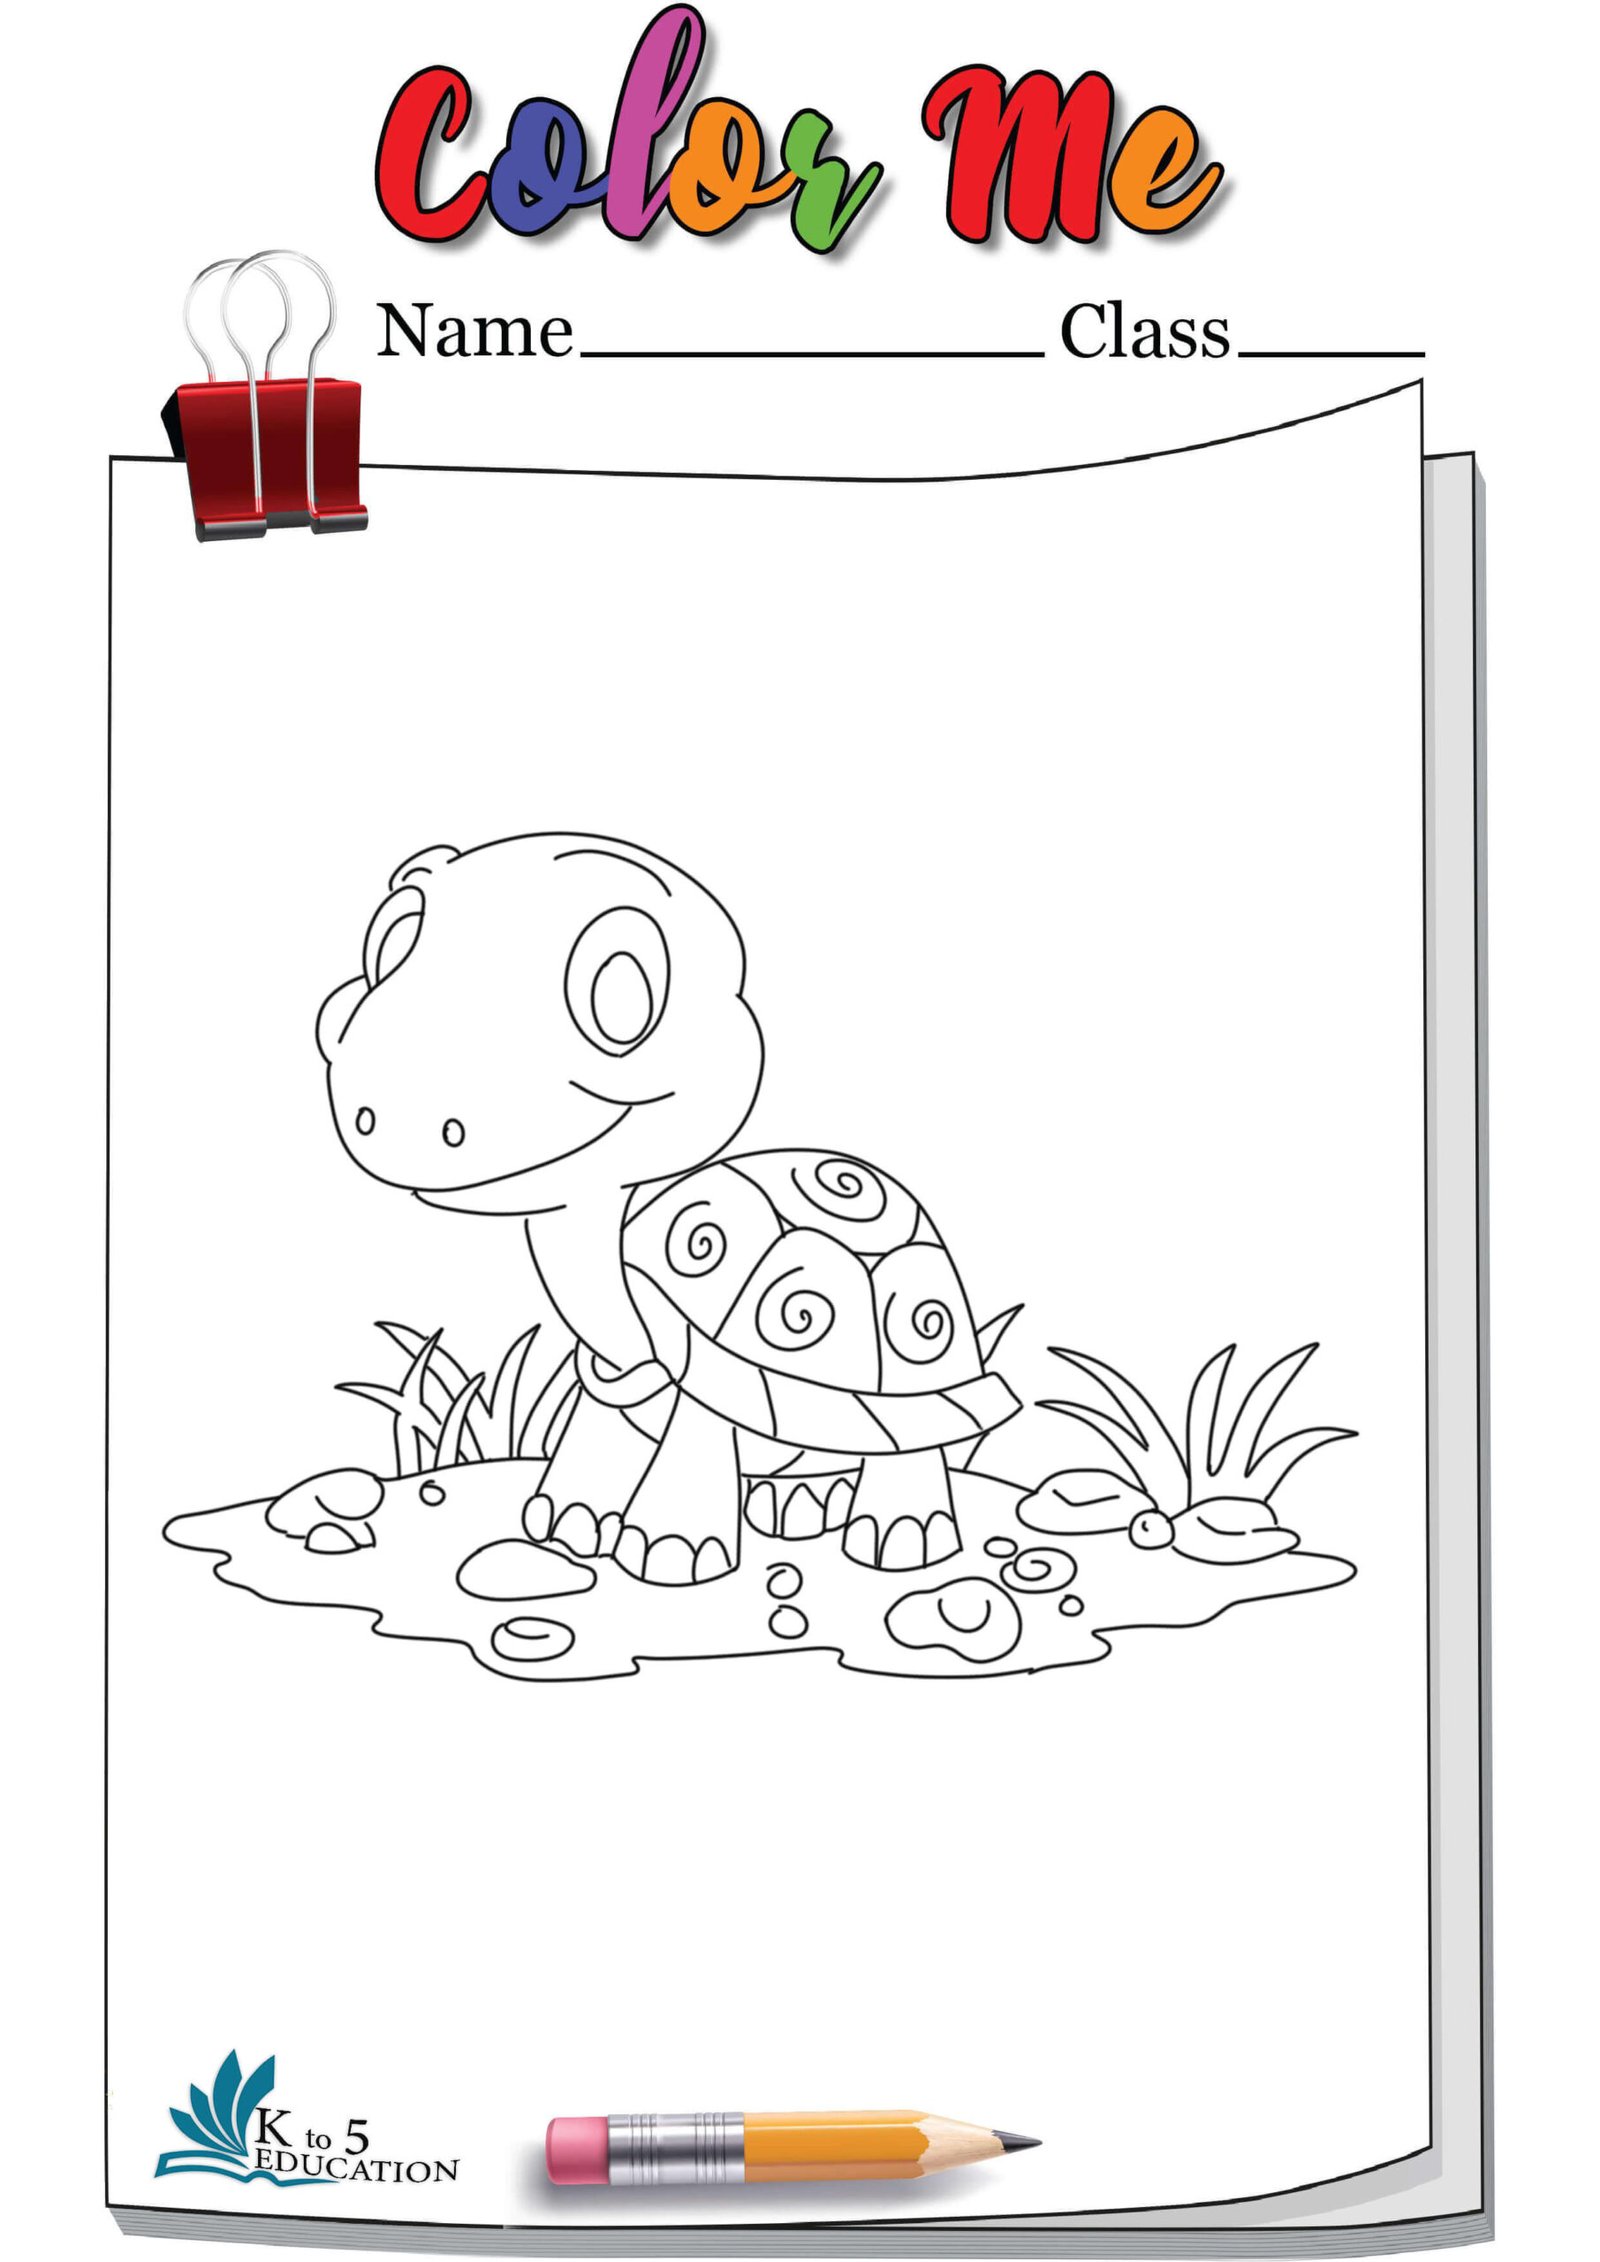 Free Coloring Pages Tmnt